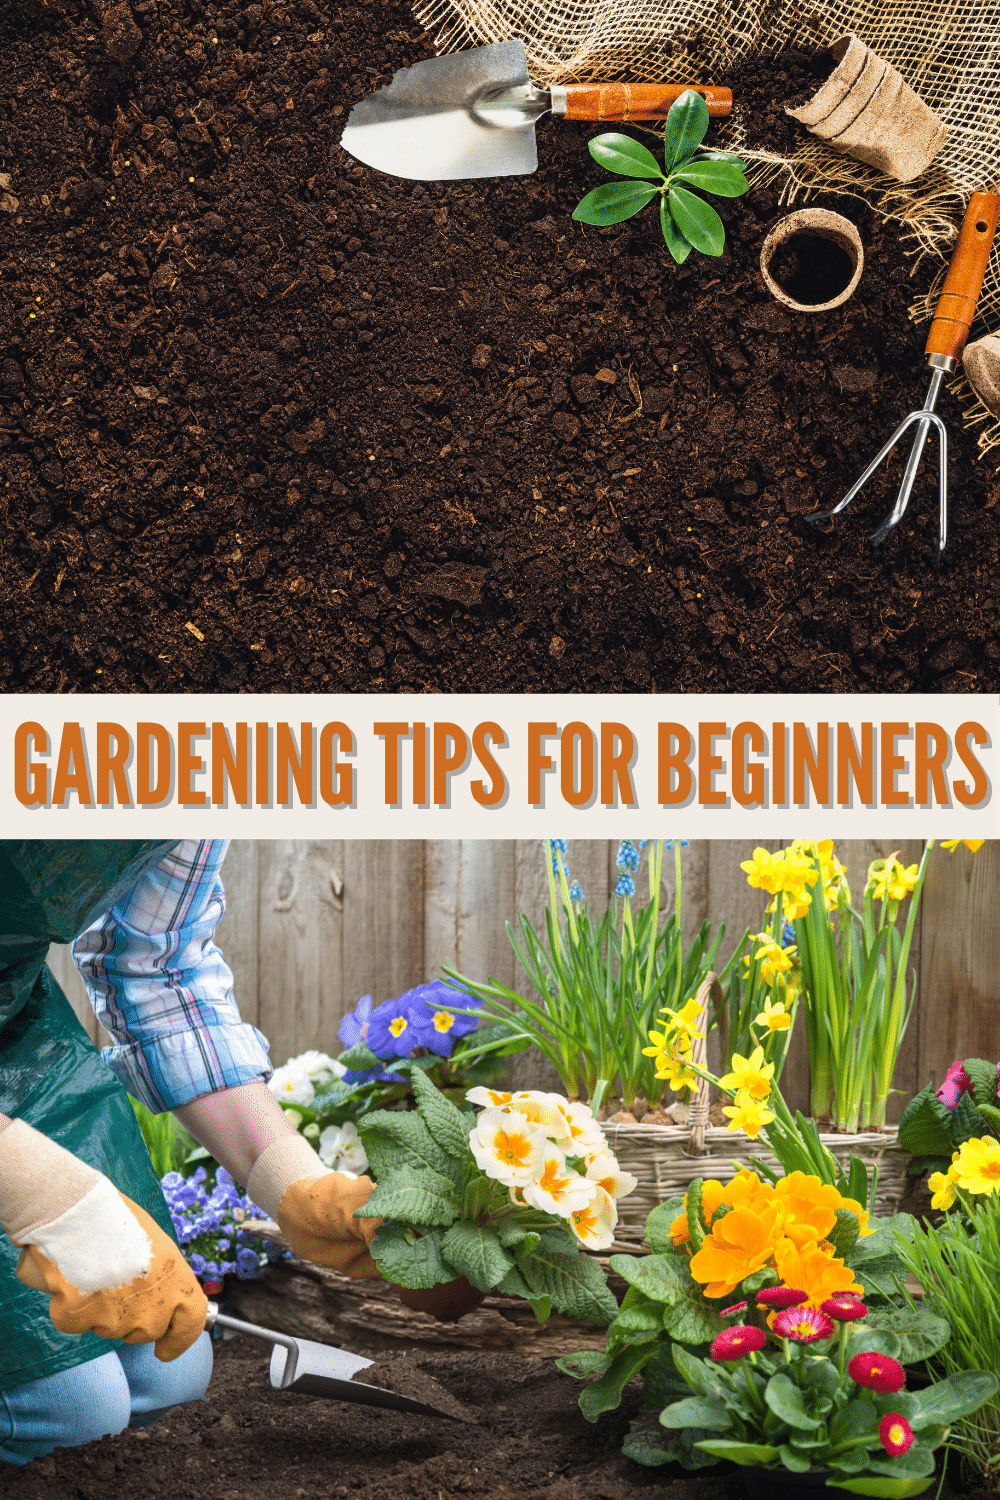 These gardening tips are perfect for beginners! If you're wanting to start your very first garden spot, you don't want to miss these tips! #garden #gardening #gardeningtips via @wondermomwannab